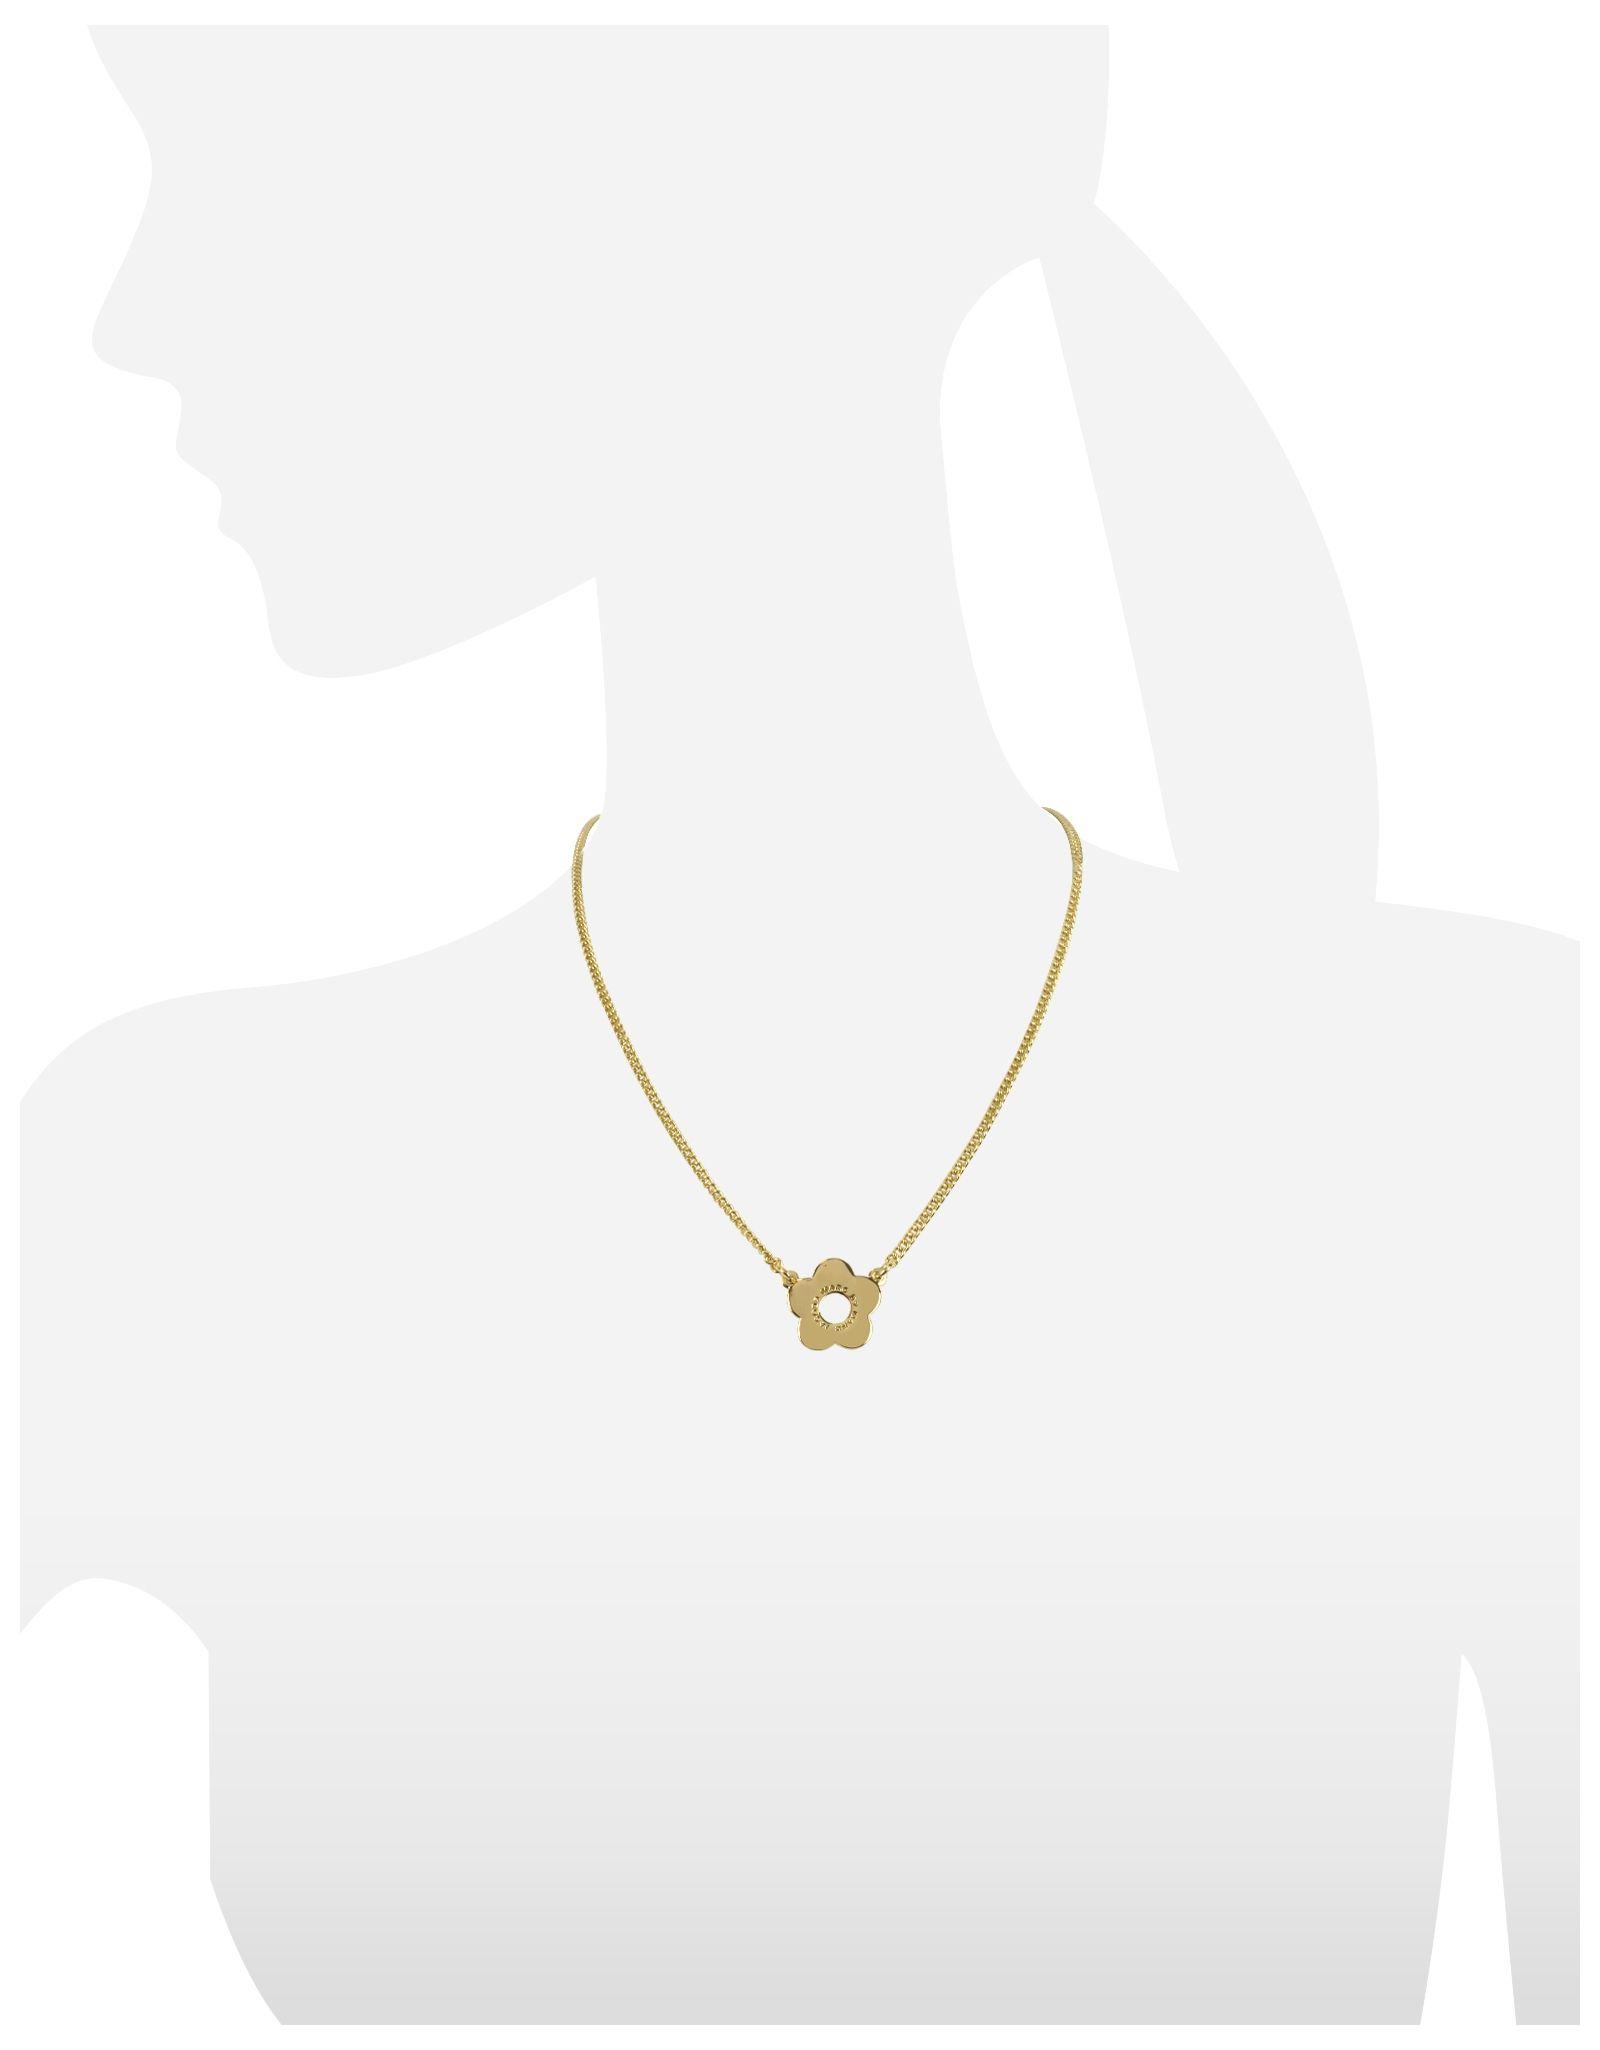 Daisy Marc Jacobs Logo - Lyst - Marc By Marc Jacobs Diamonds And Daisy Logo Pendant Necklace ...